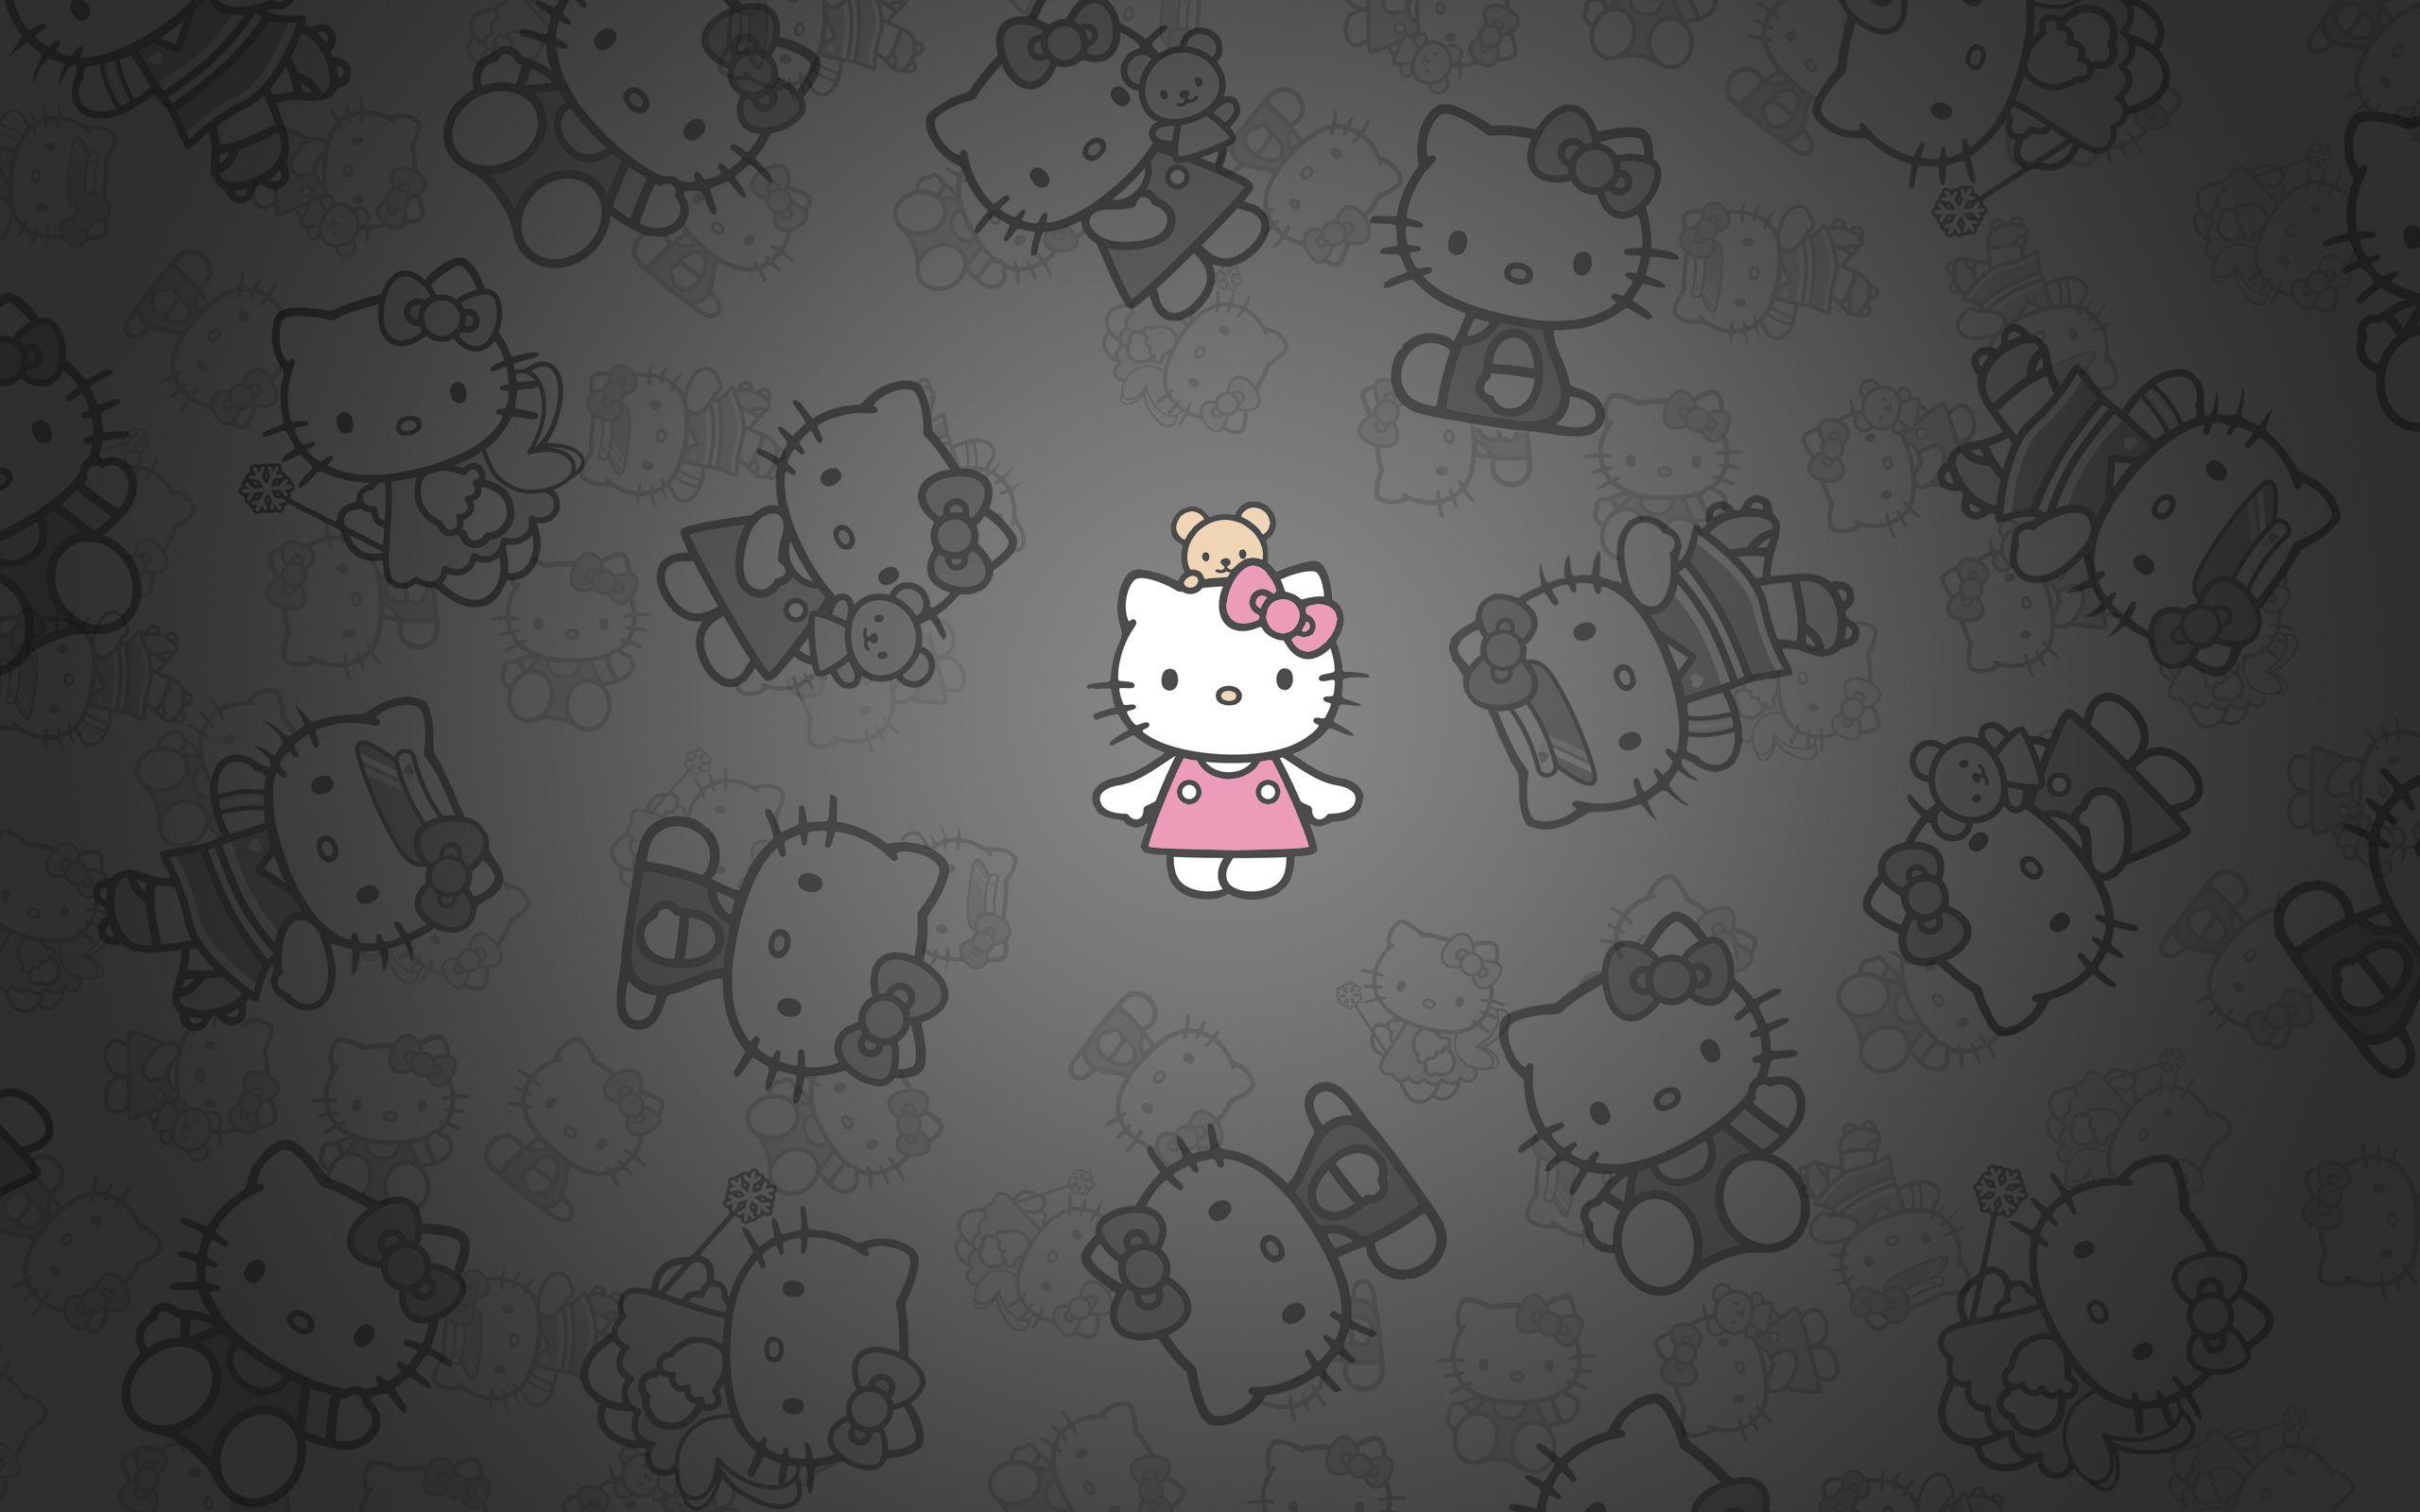 Black and White Hello Kitty Wallpapers - Top Free Black and White Hello